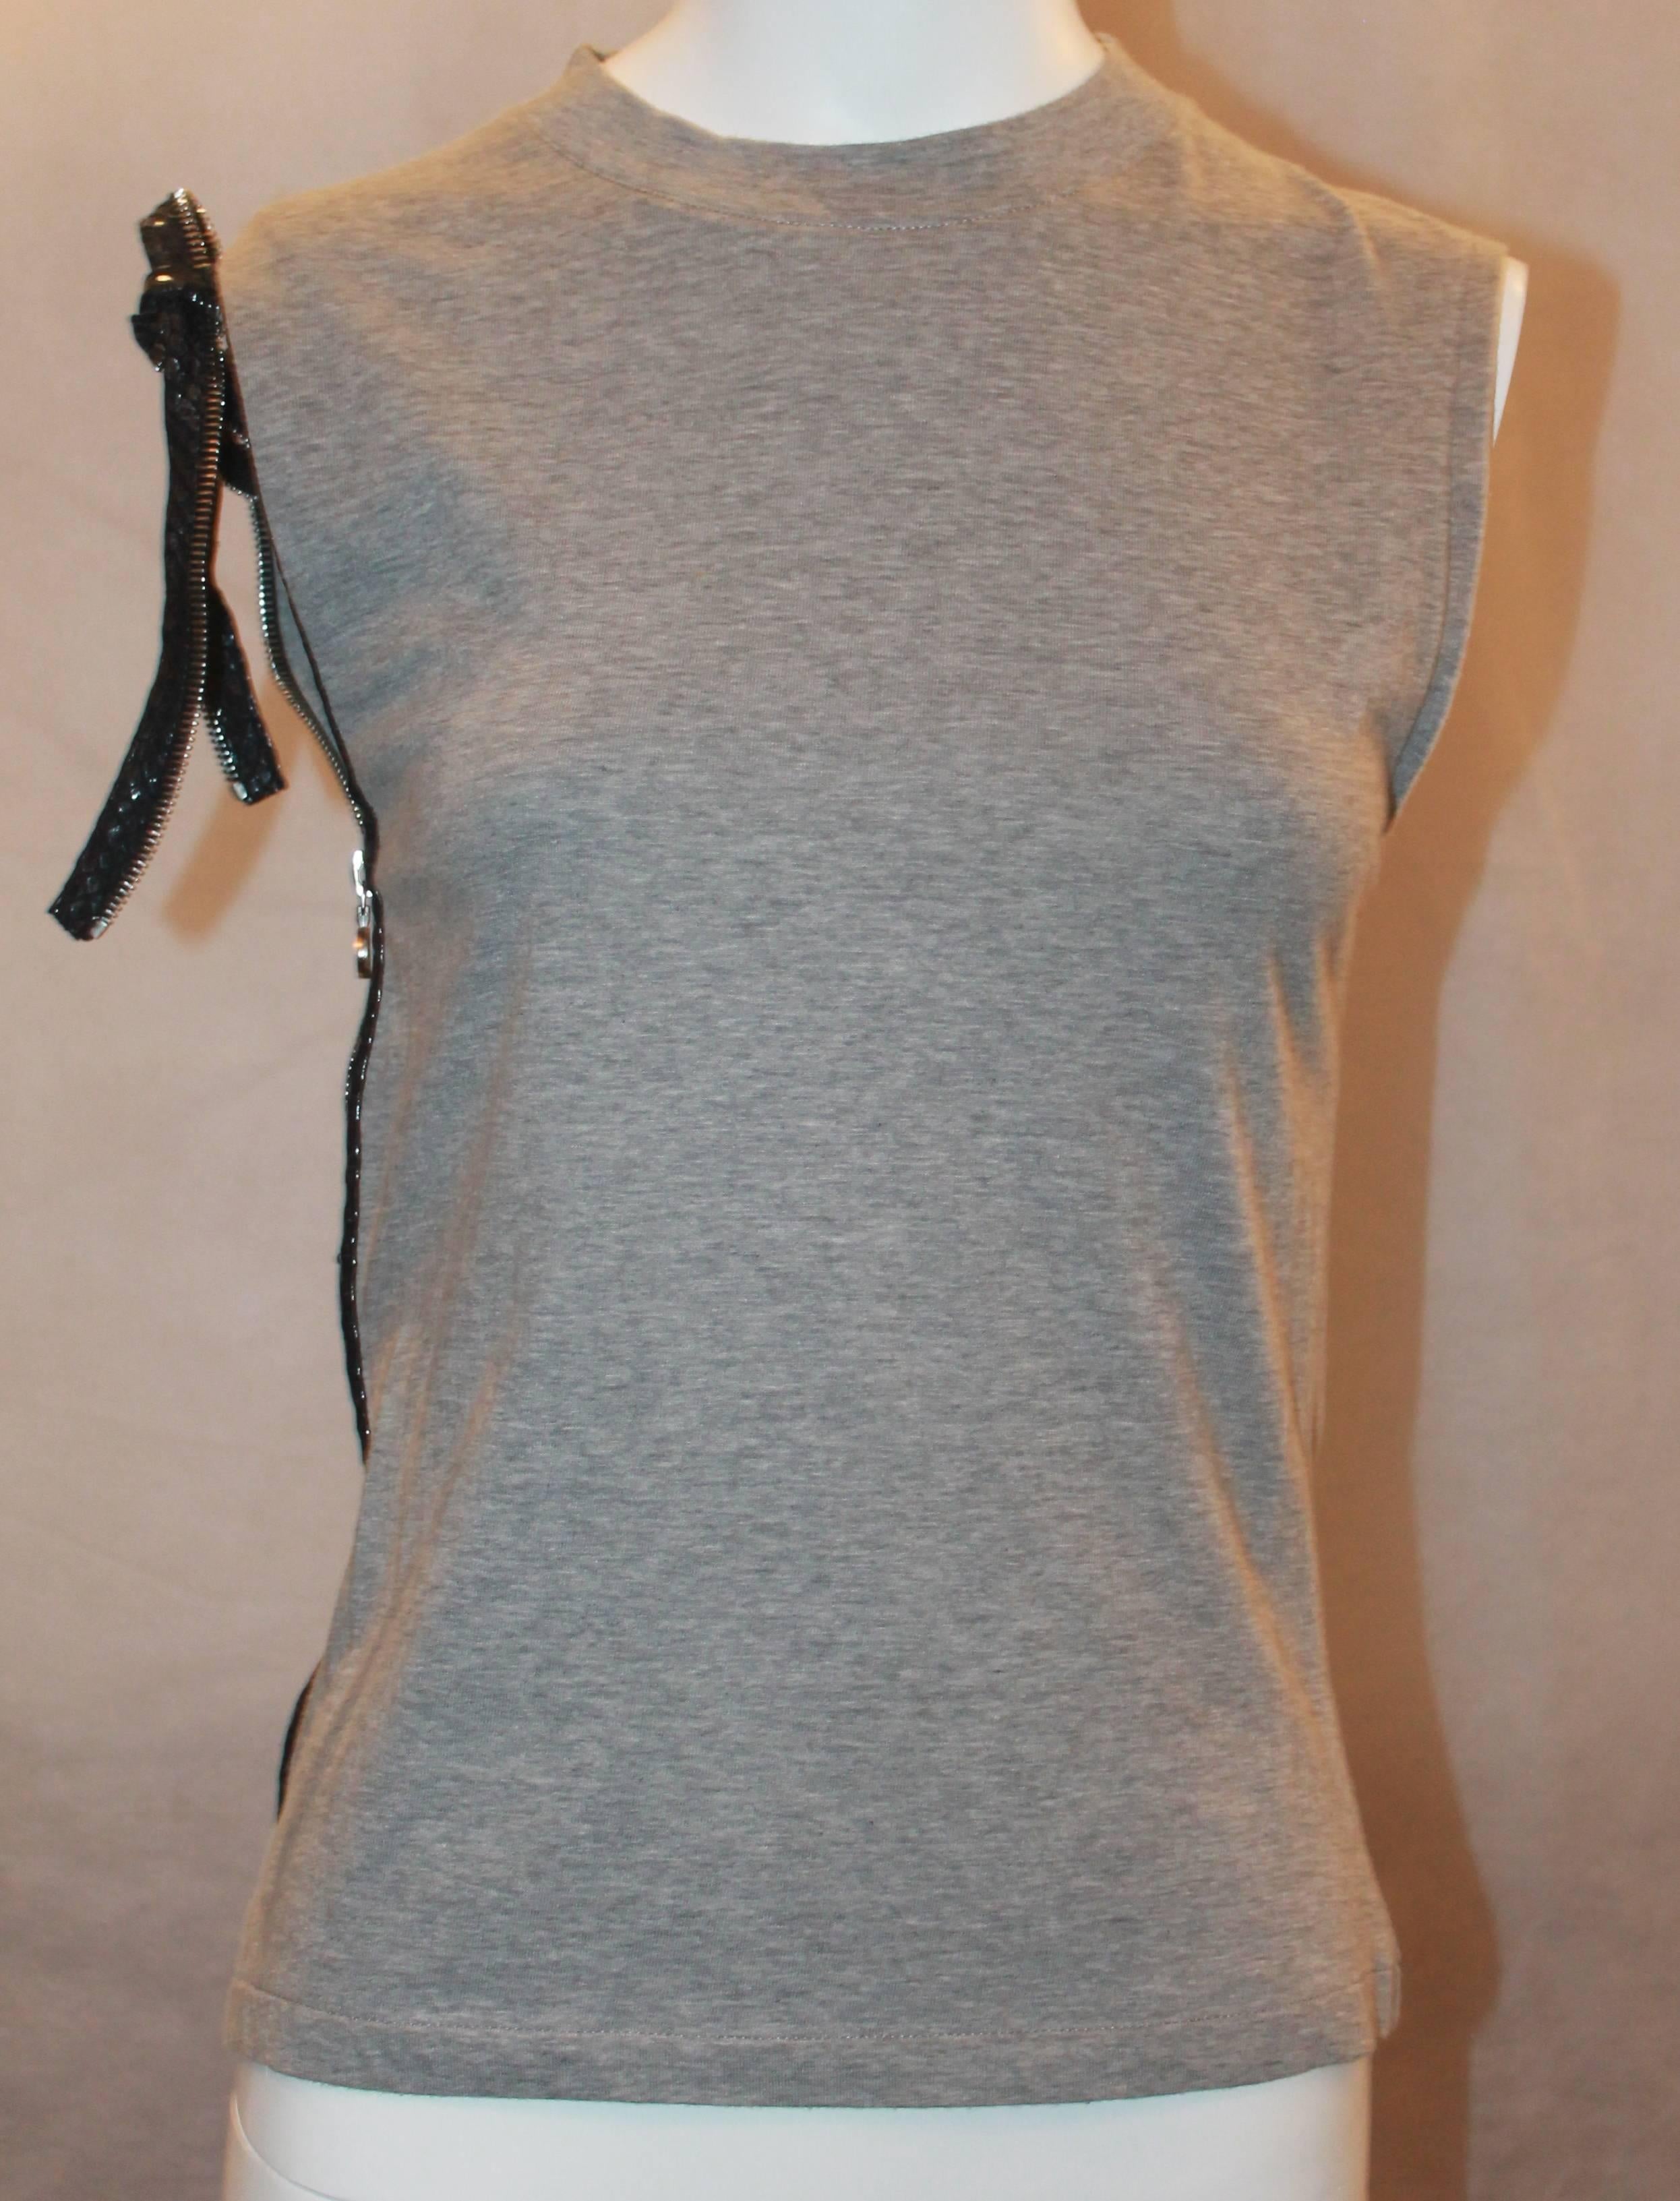 Christian Dior Grey Cotton Sleeveless Top w/ Leather Side Zip & Bow- US: 8 FR:40.  This top is in excellent condition.  It features a unique leather side zip that is functional and continues up into a bow on the right shoulder.  It is a great